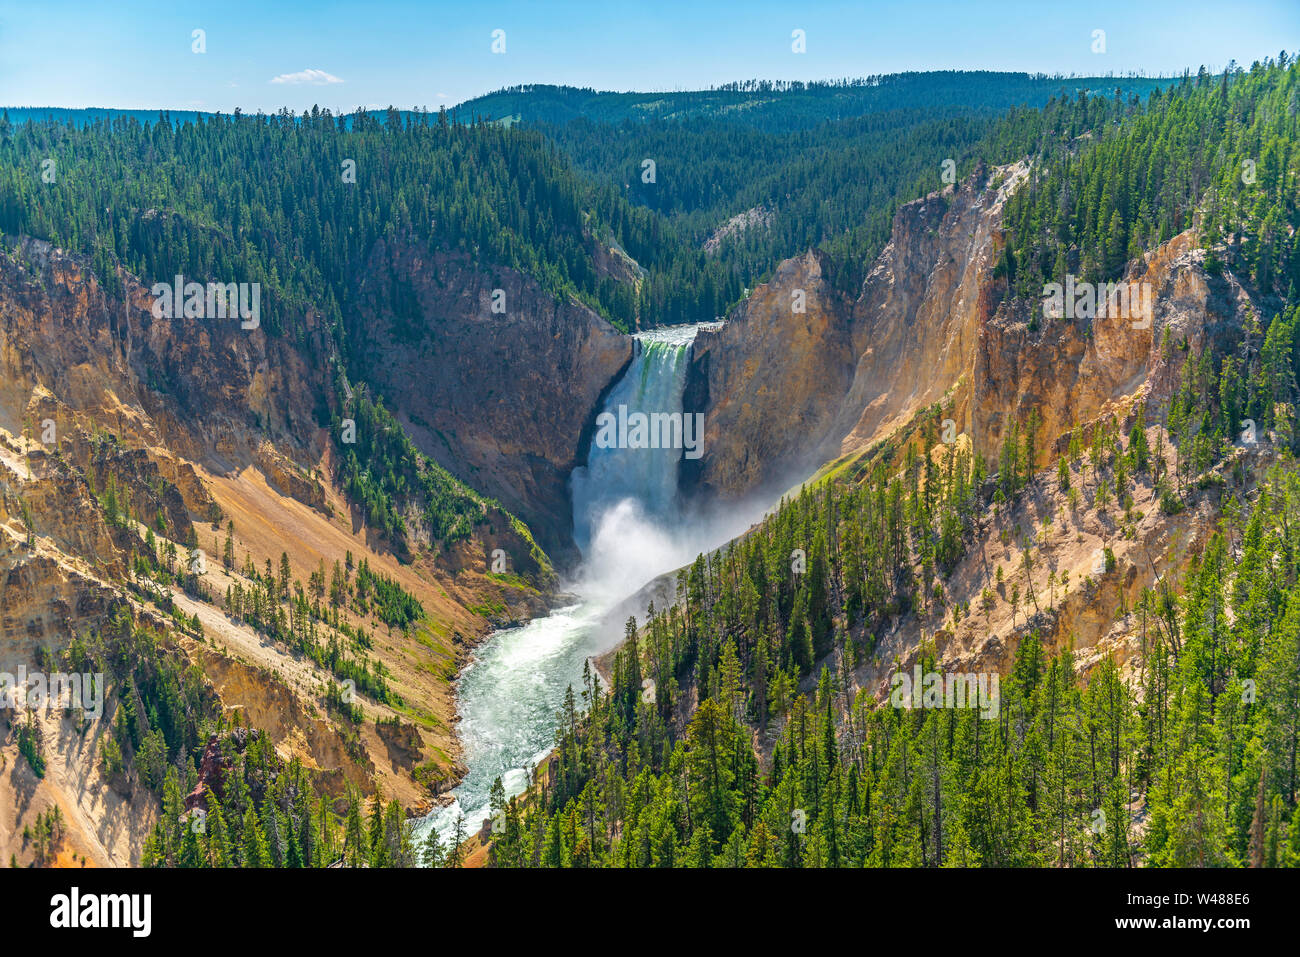 The Grand Canyon of the Yellowstone with the Lower Falls and Yellowstone river, Yellowstone national park, Wyoming, United States of America, USA. Stock Photo